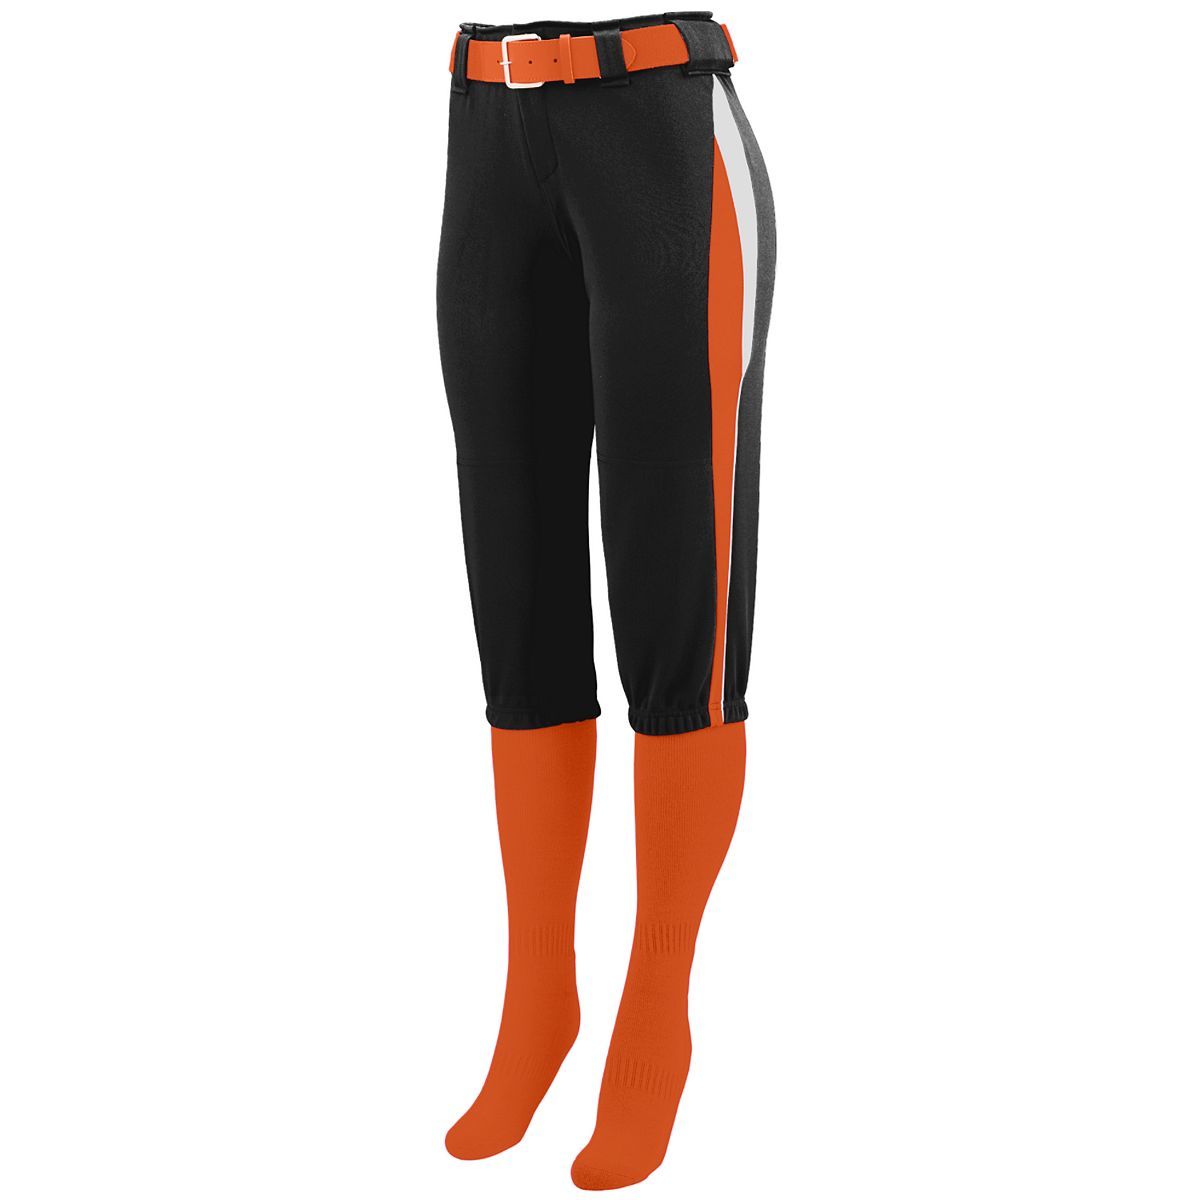 Augusta Sportswear Ladies Comet Pant in Black/Orange/White  -Part of the Ladies, Ladies-Pants, Pants, Augusta-Products, Softball product lines at KanaleyCreations.com